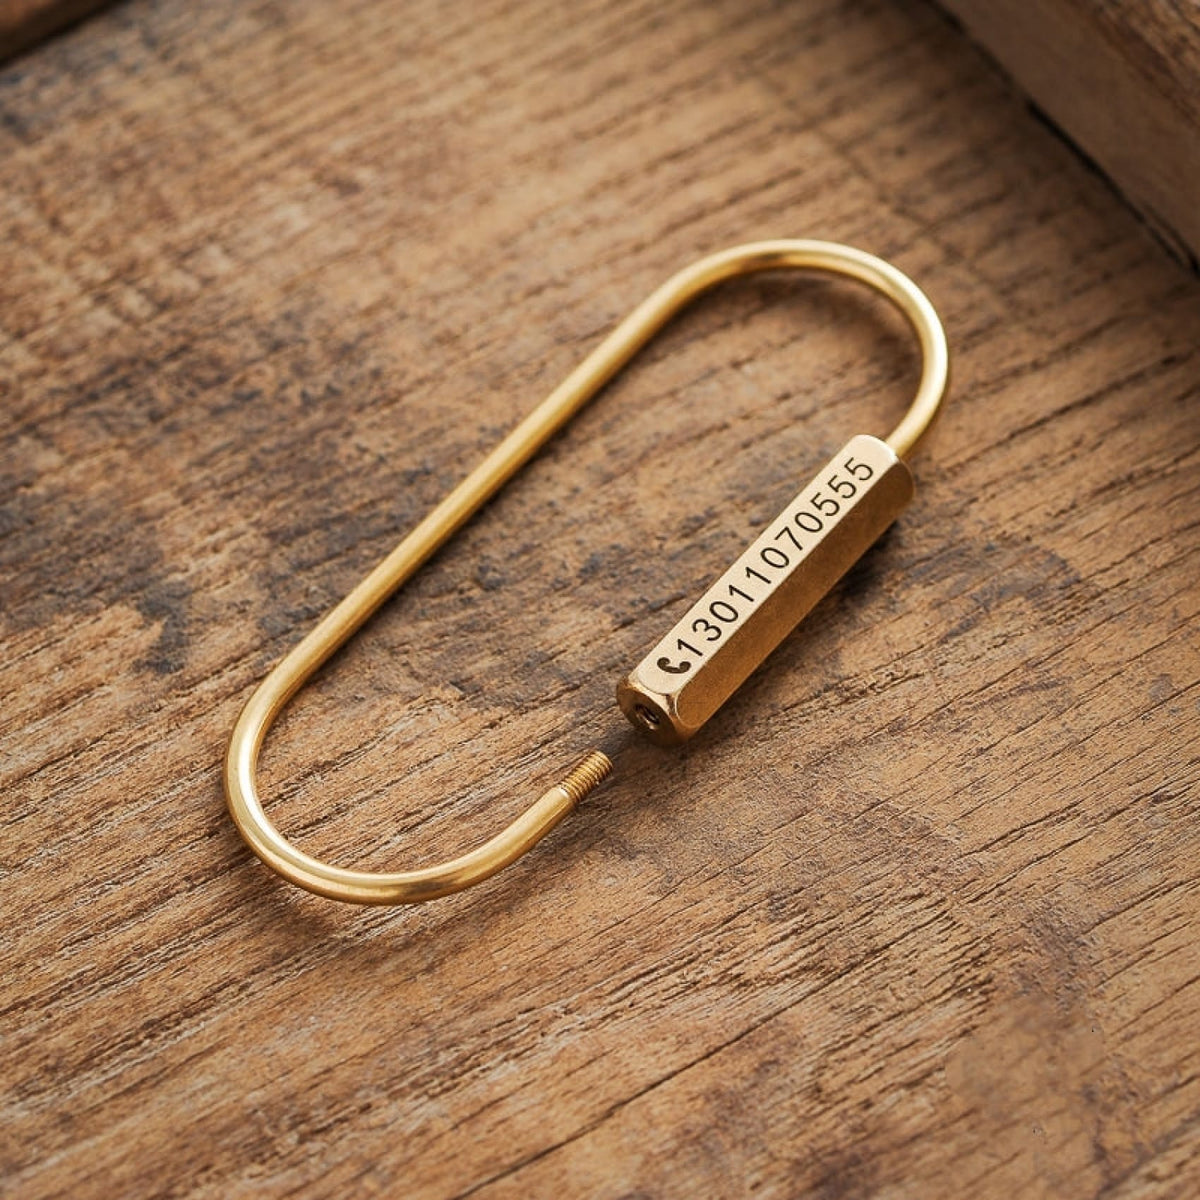 Personalized Text Brass Keychain Key Holder Gifts for Birthday,Friendship Gifts